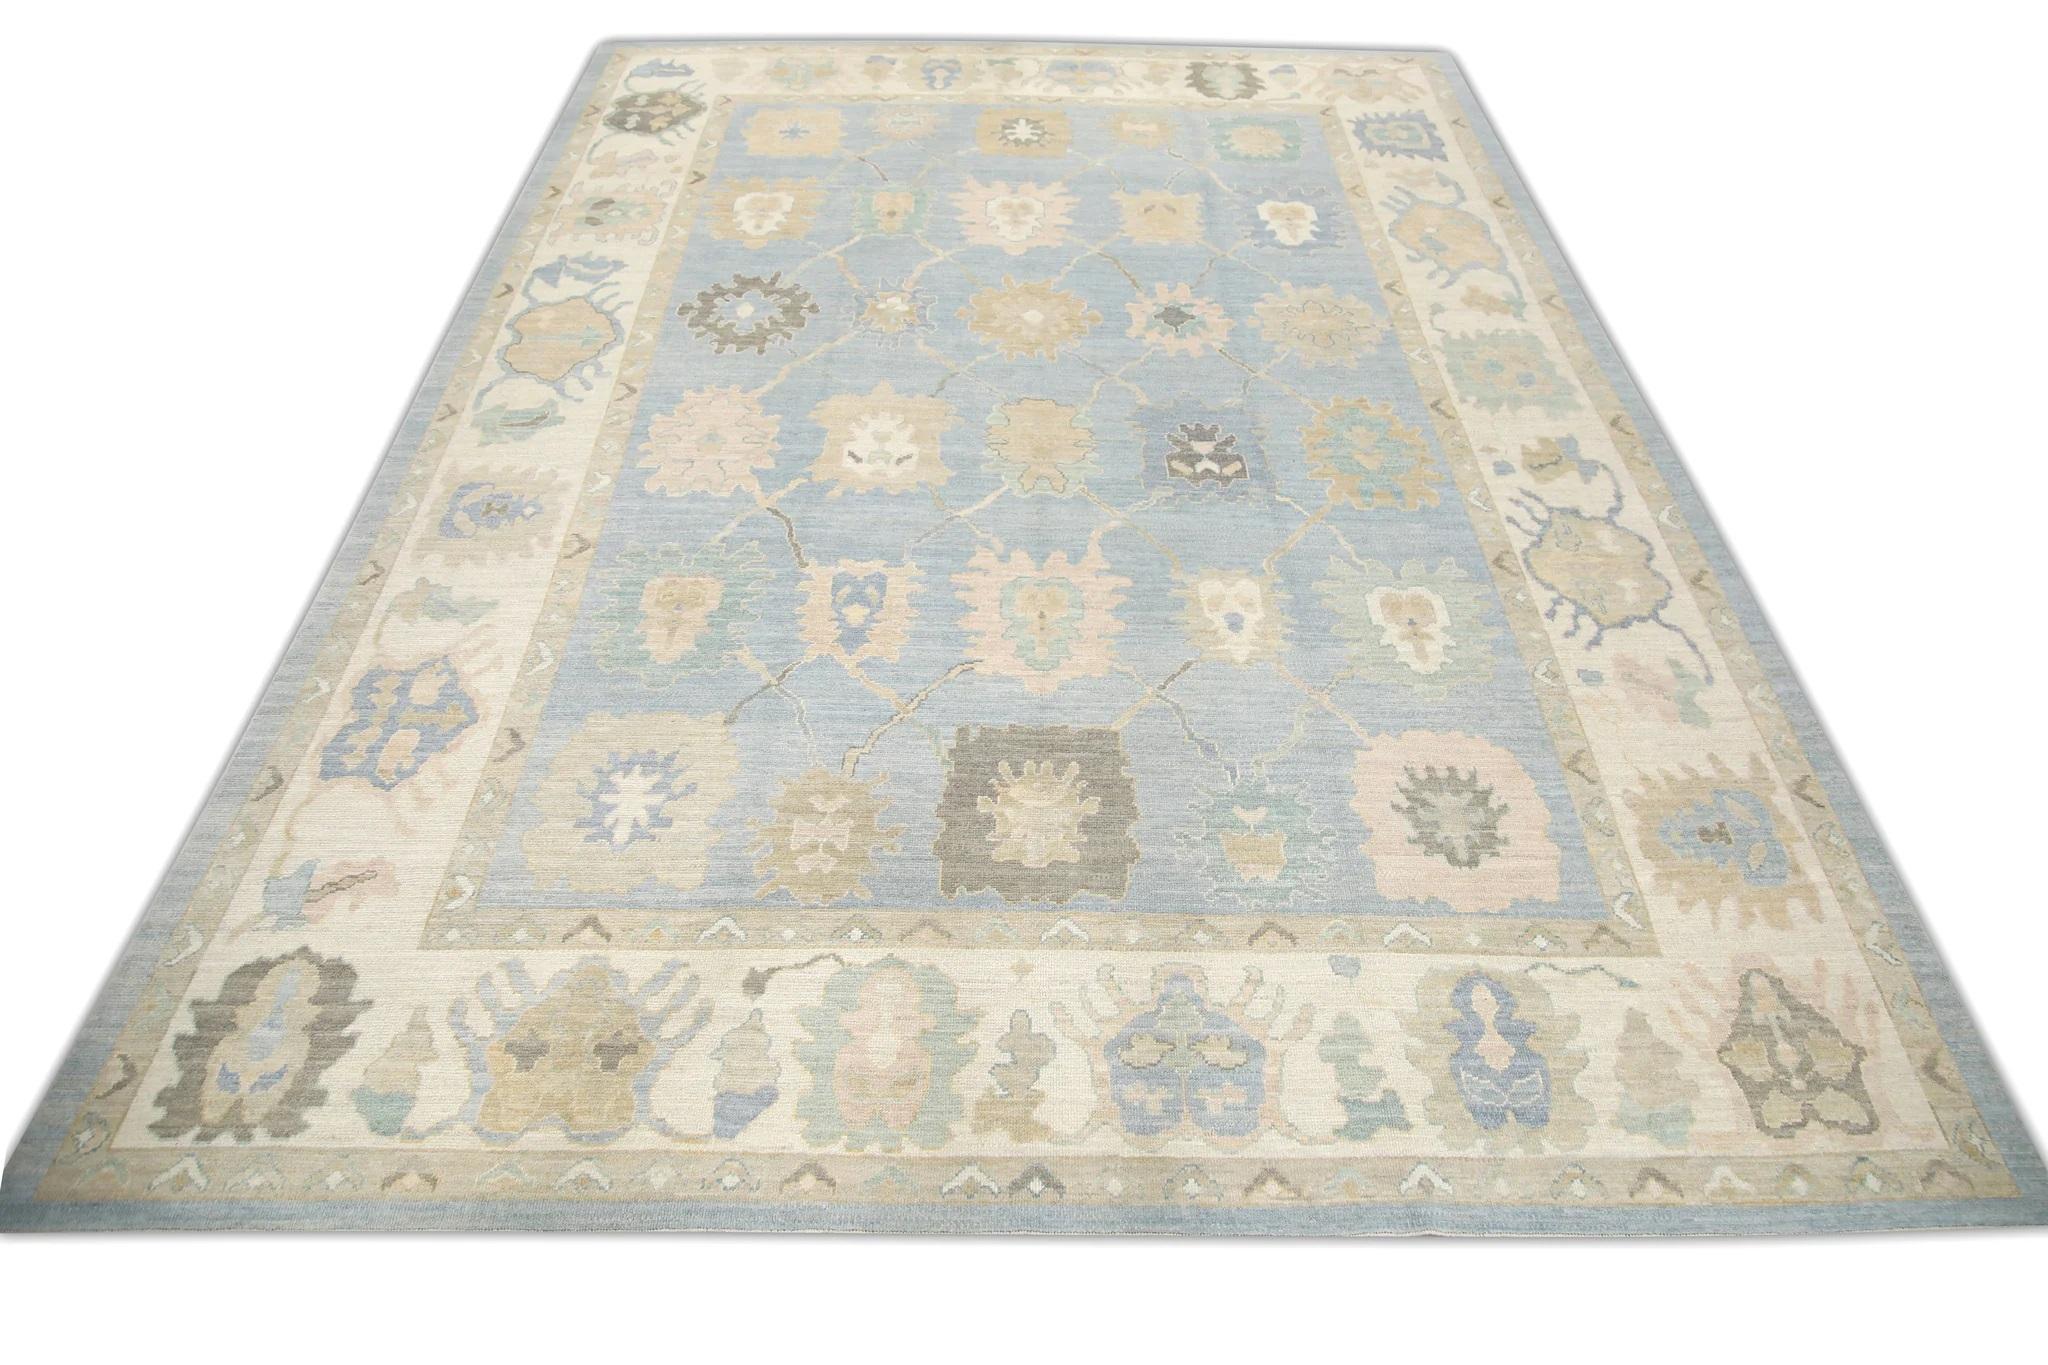 Contemporary Blue Floral Design Handwoven Wool Oversized Turkish Oushak Rug 12'1